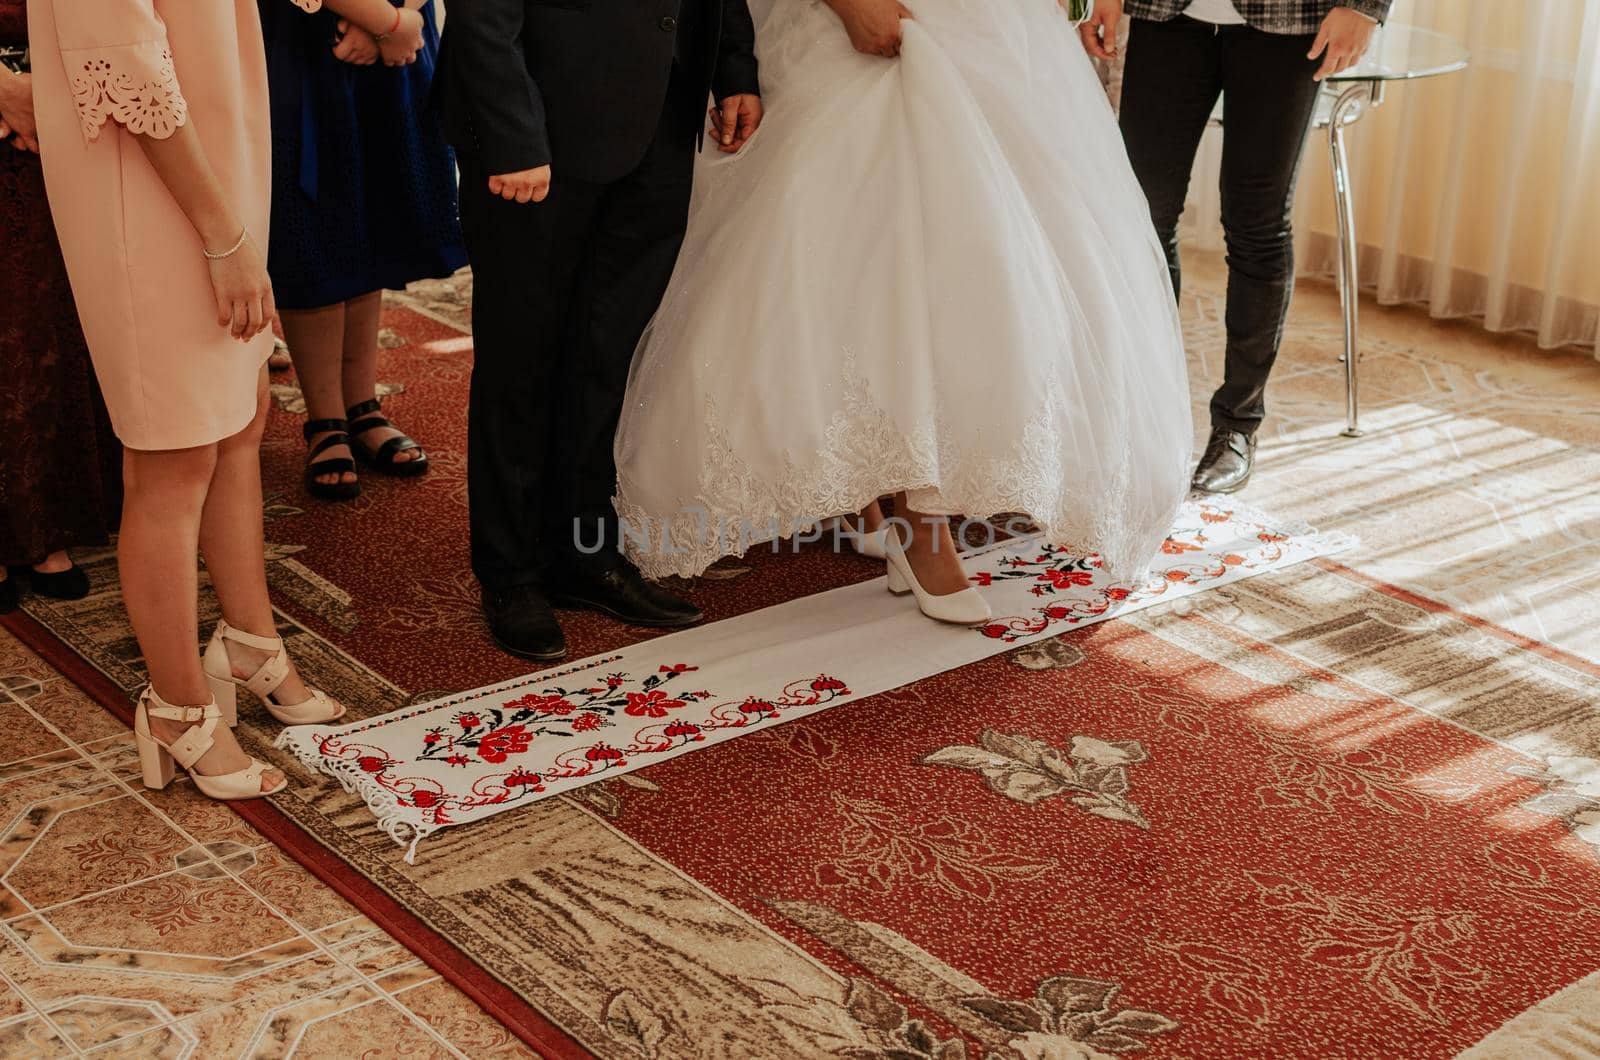 The bride and groom take a step on white national towels. Ukrainian national ornament embroidered.